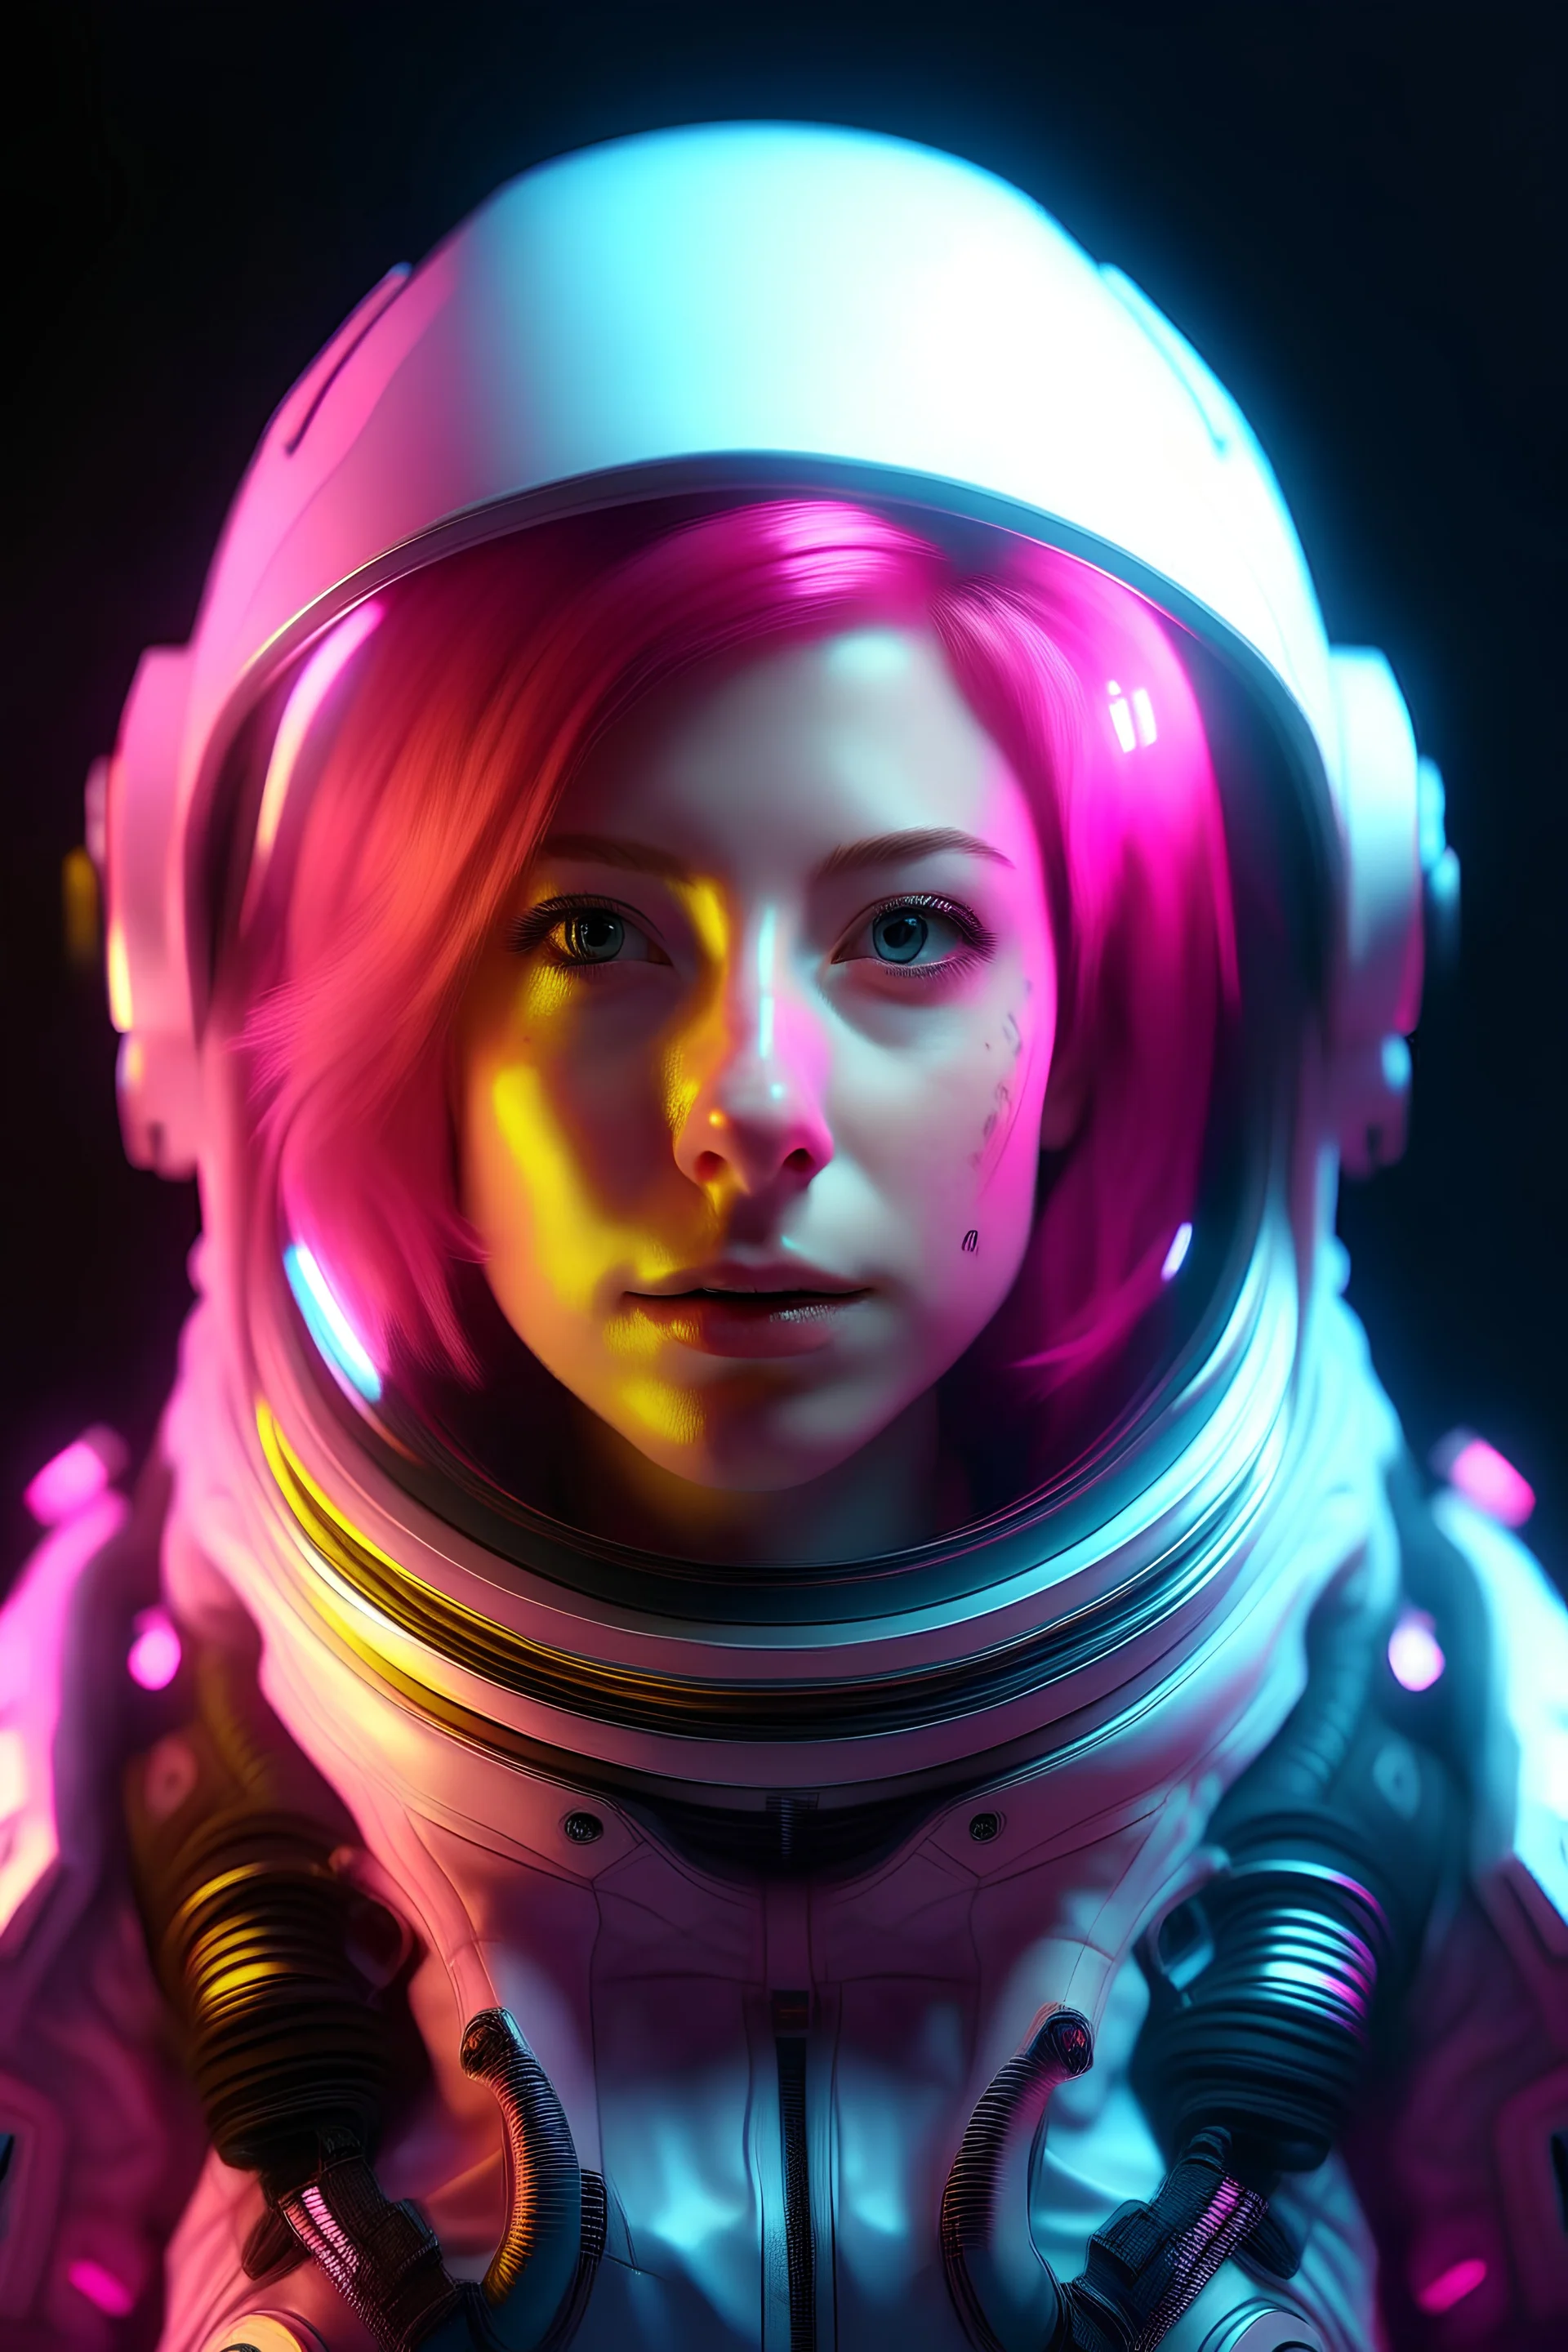 Portrait of a glowing scifi woman in a futuristic astronaut suit, inspired by Jen Bartel, with pink hair, facing the camera, vertical orientation, ultra-detailed, glowing lights, helmet with tinted visor, ethereal aesthetic